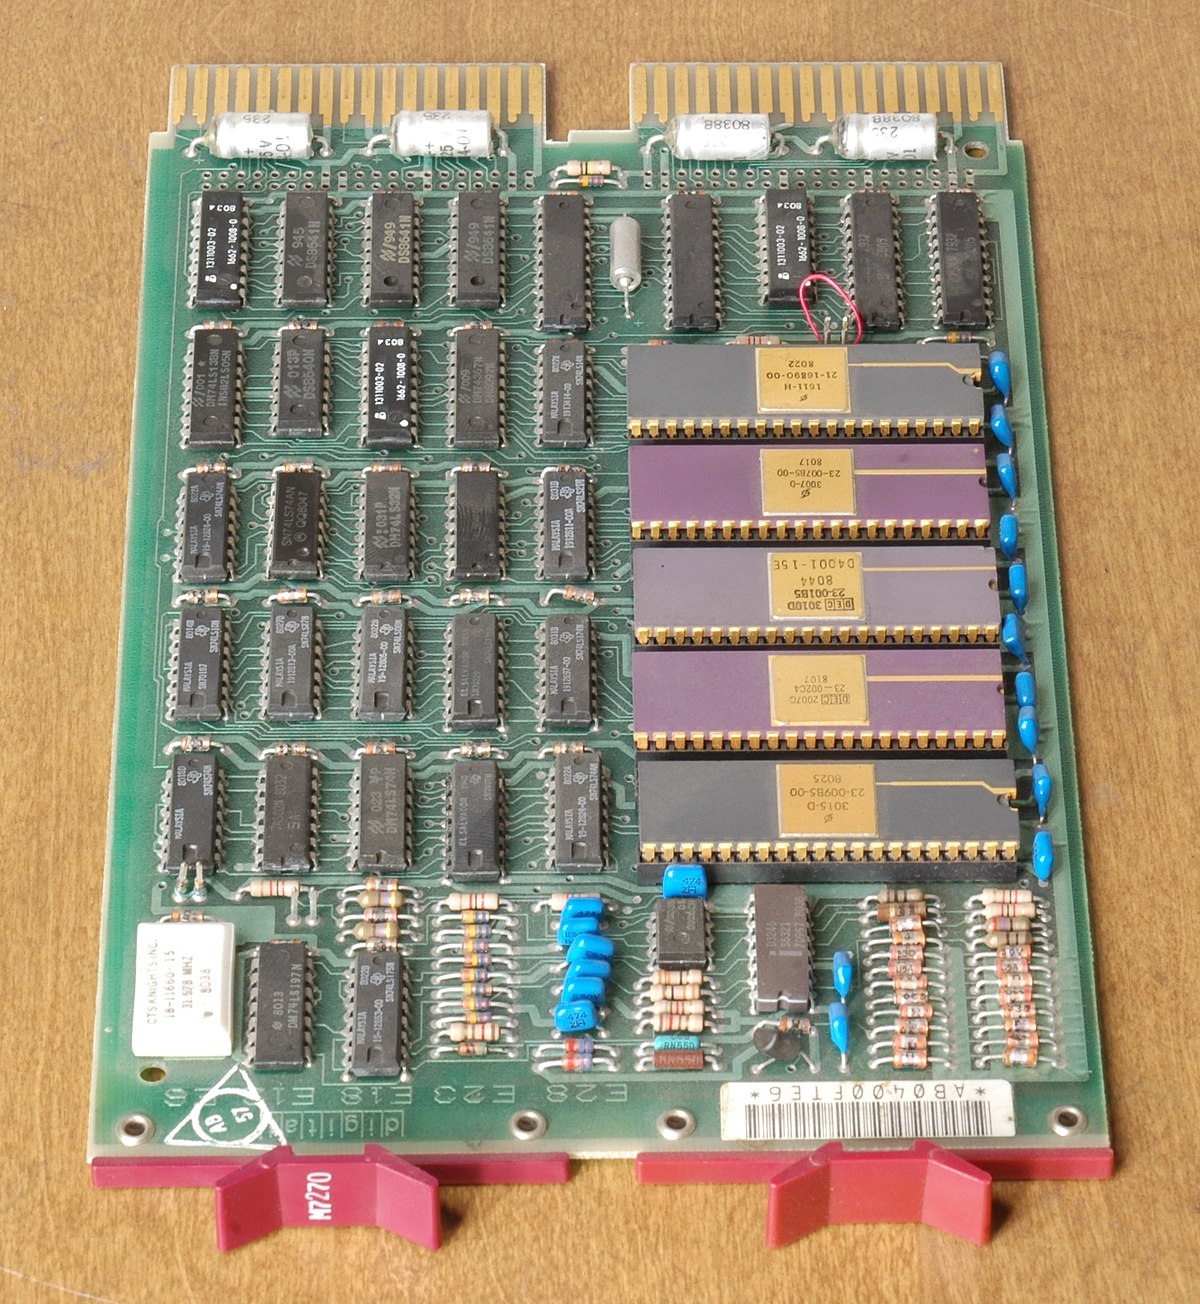 Circuit board or computer hardware components